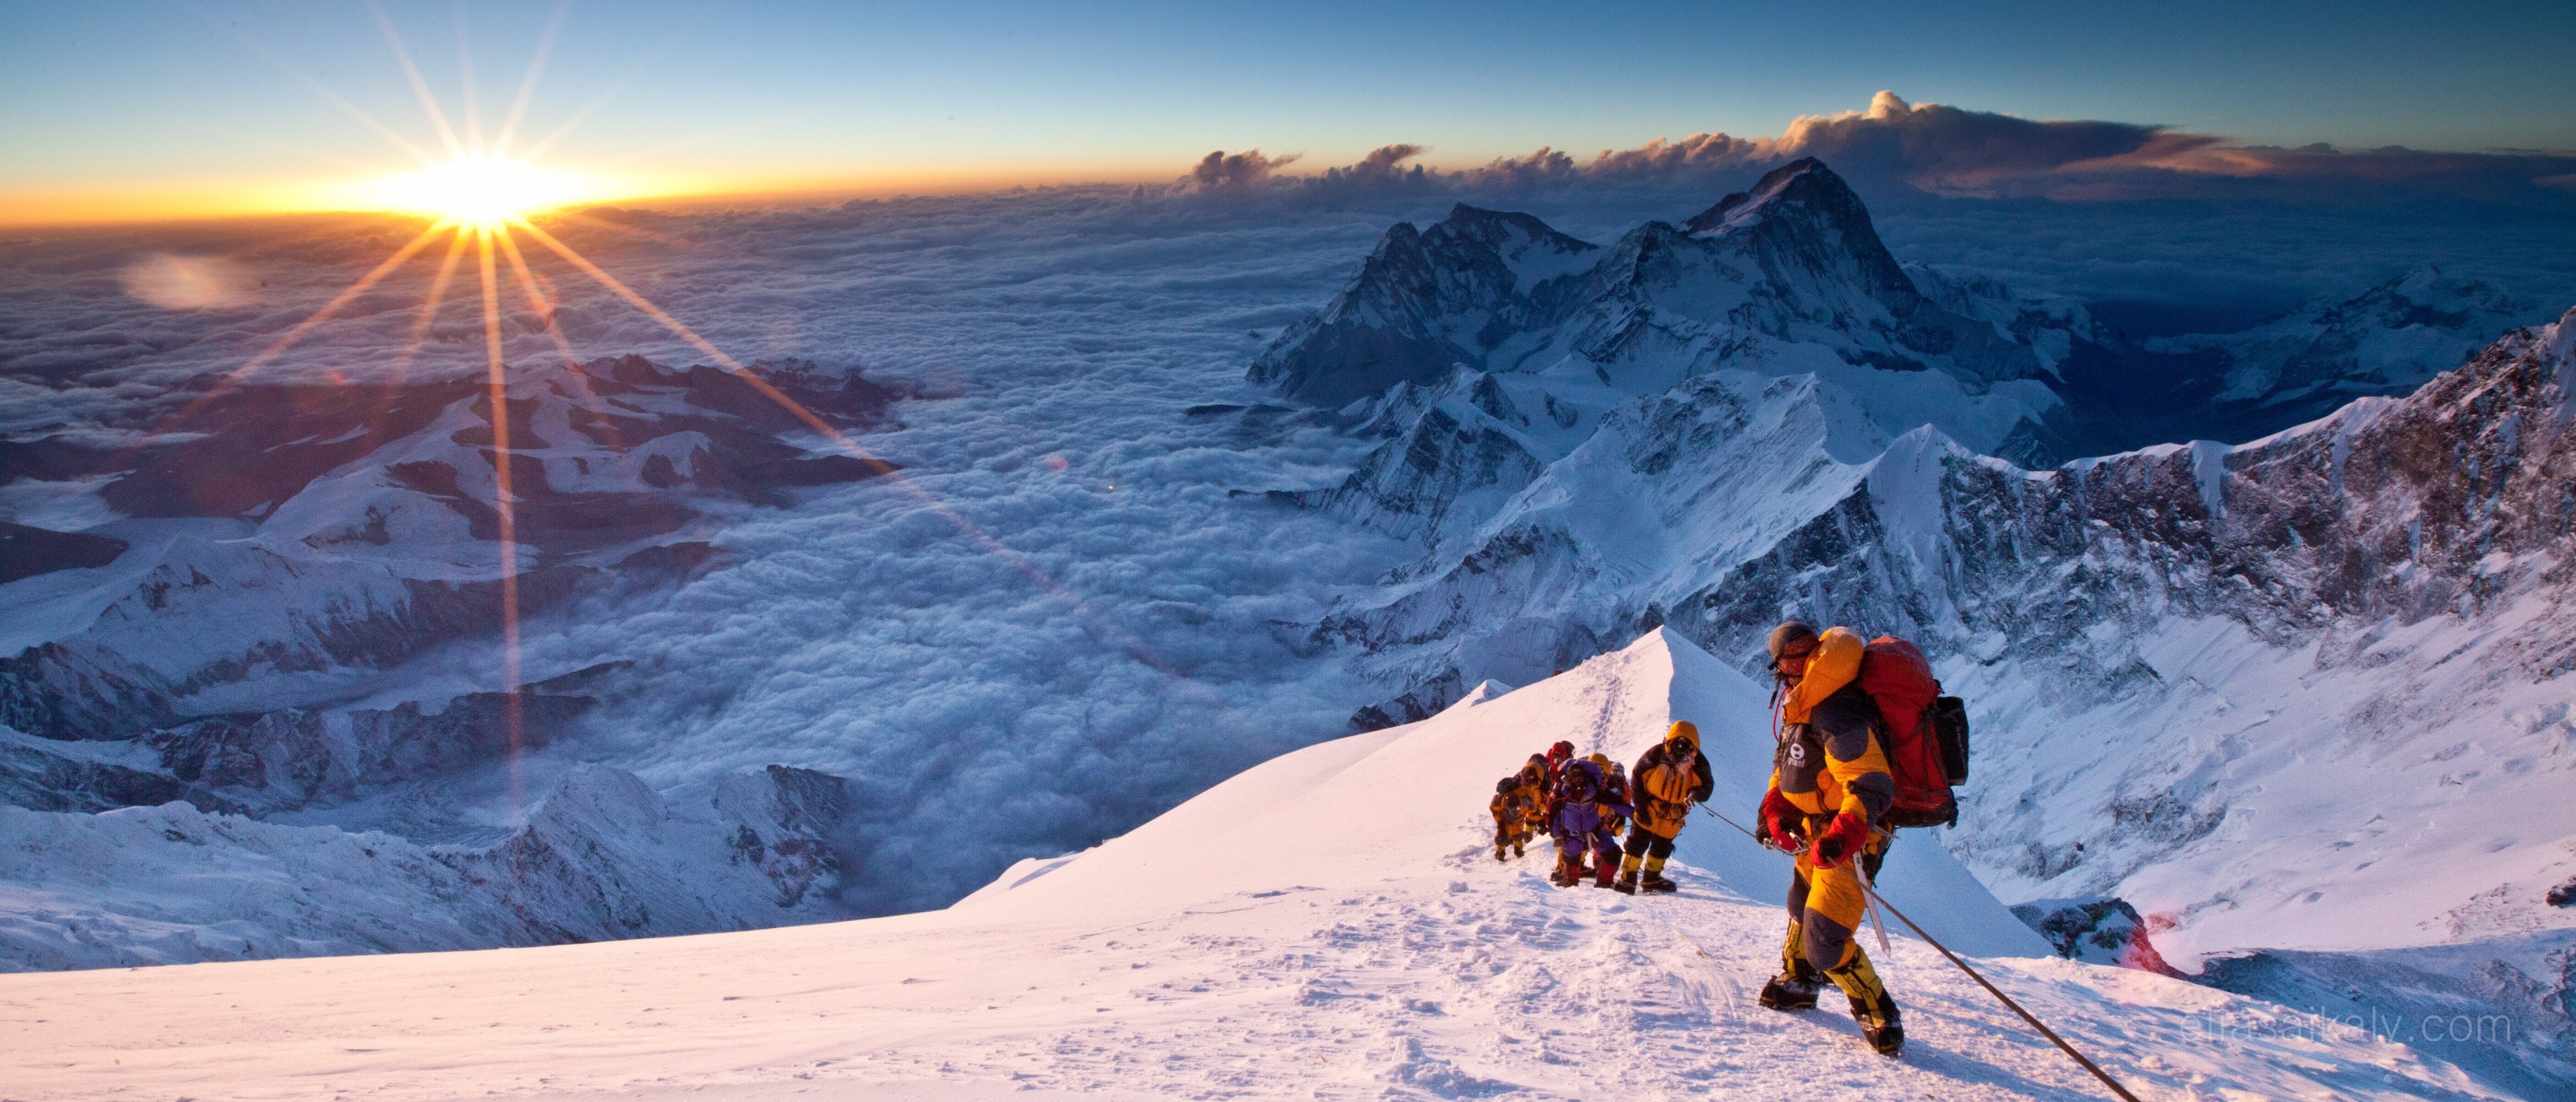 3840x1642 everest 4k free download wallpaper for pc Gallery HD Wallpaper